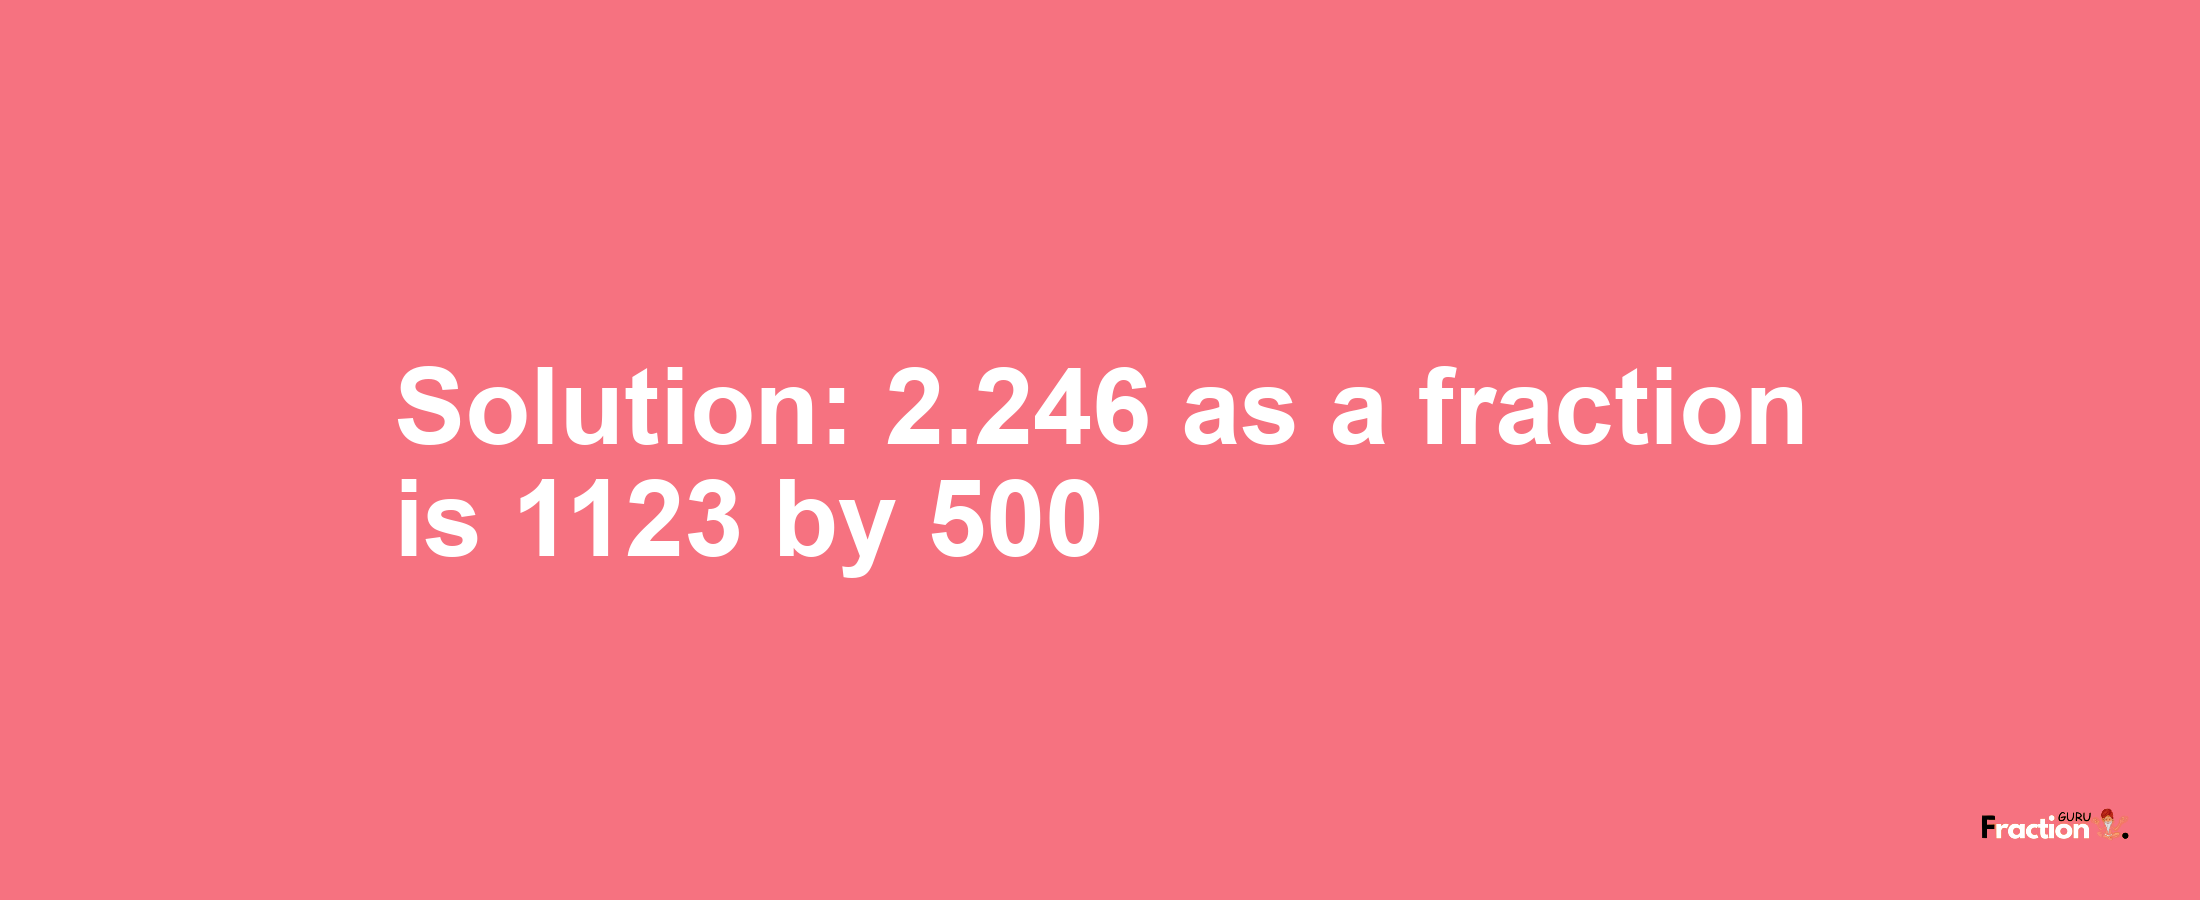 Solution:2.246 as a fraction is 1123/500